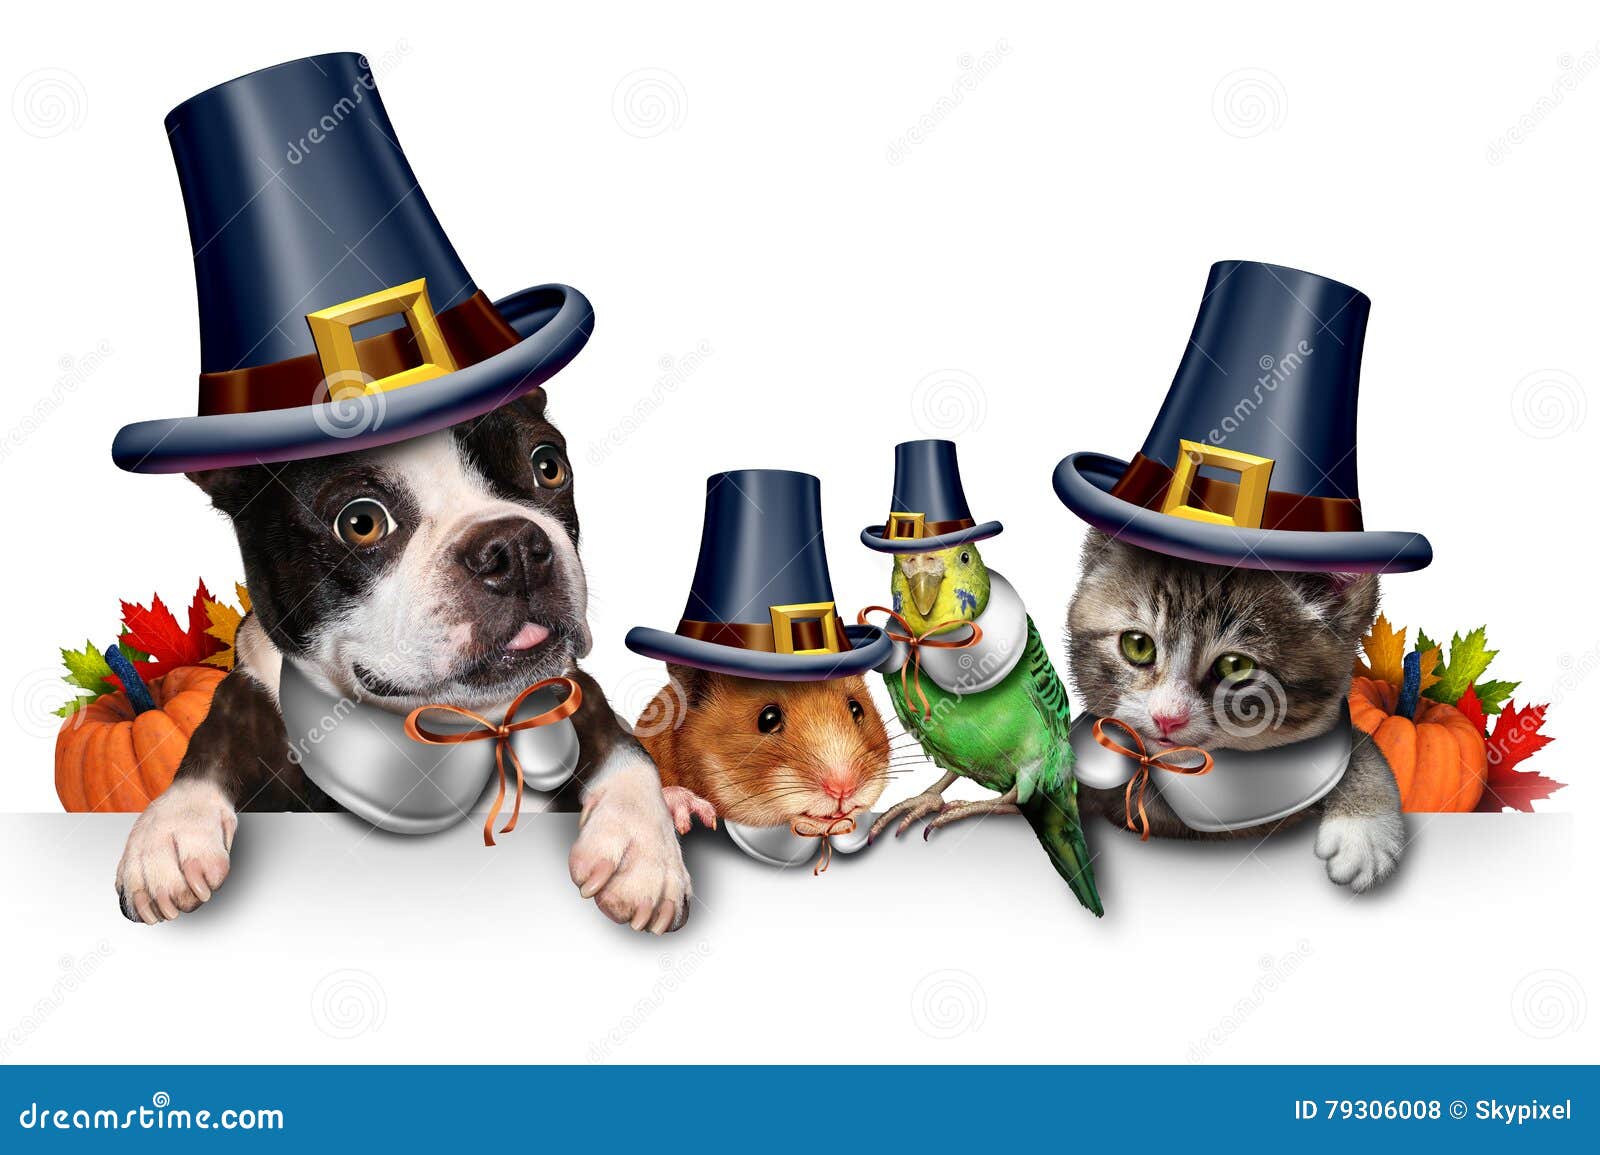 Image result for pet thanksgiving images